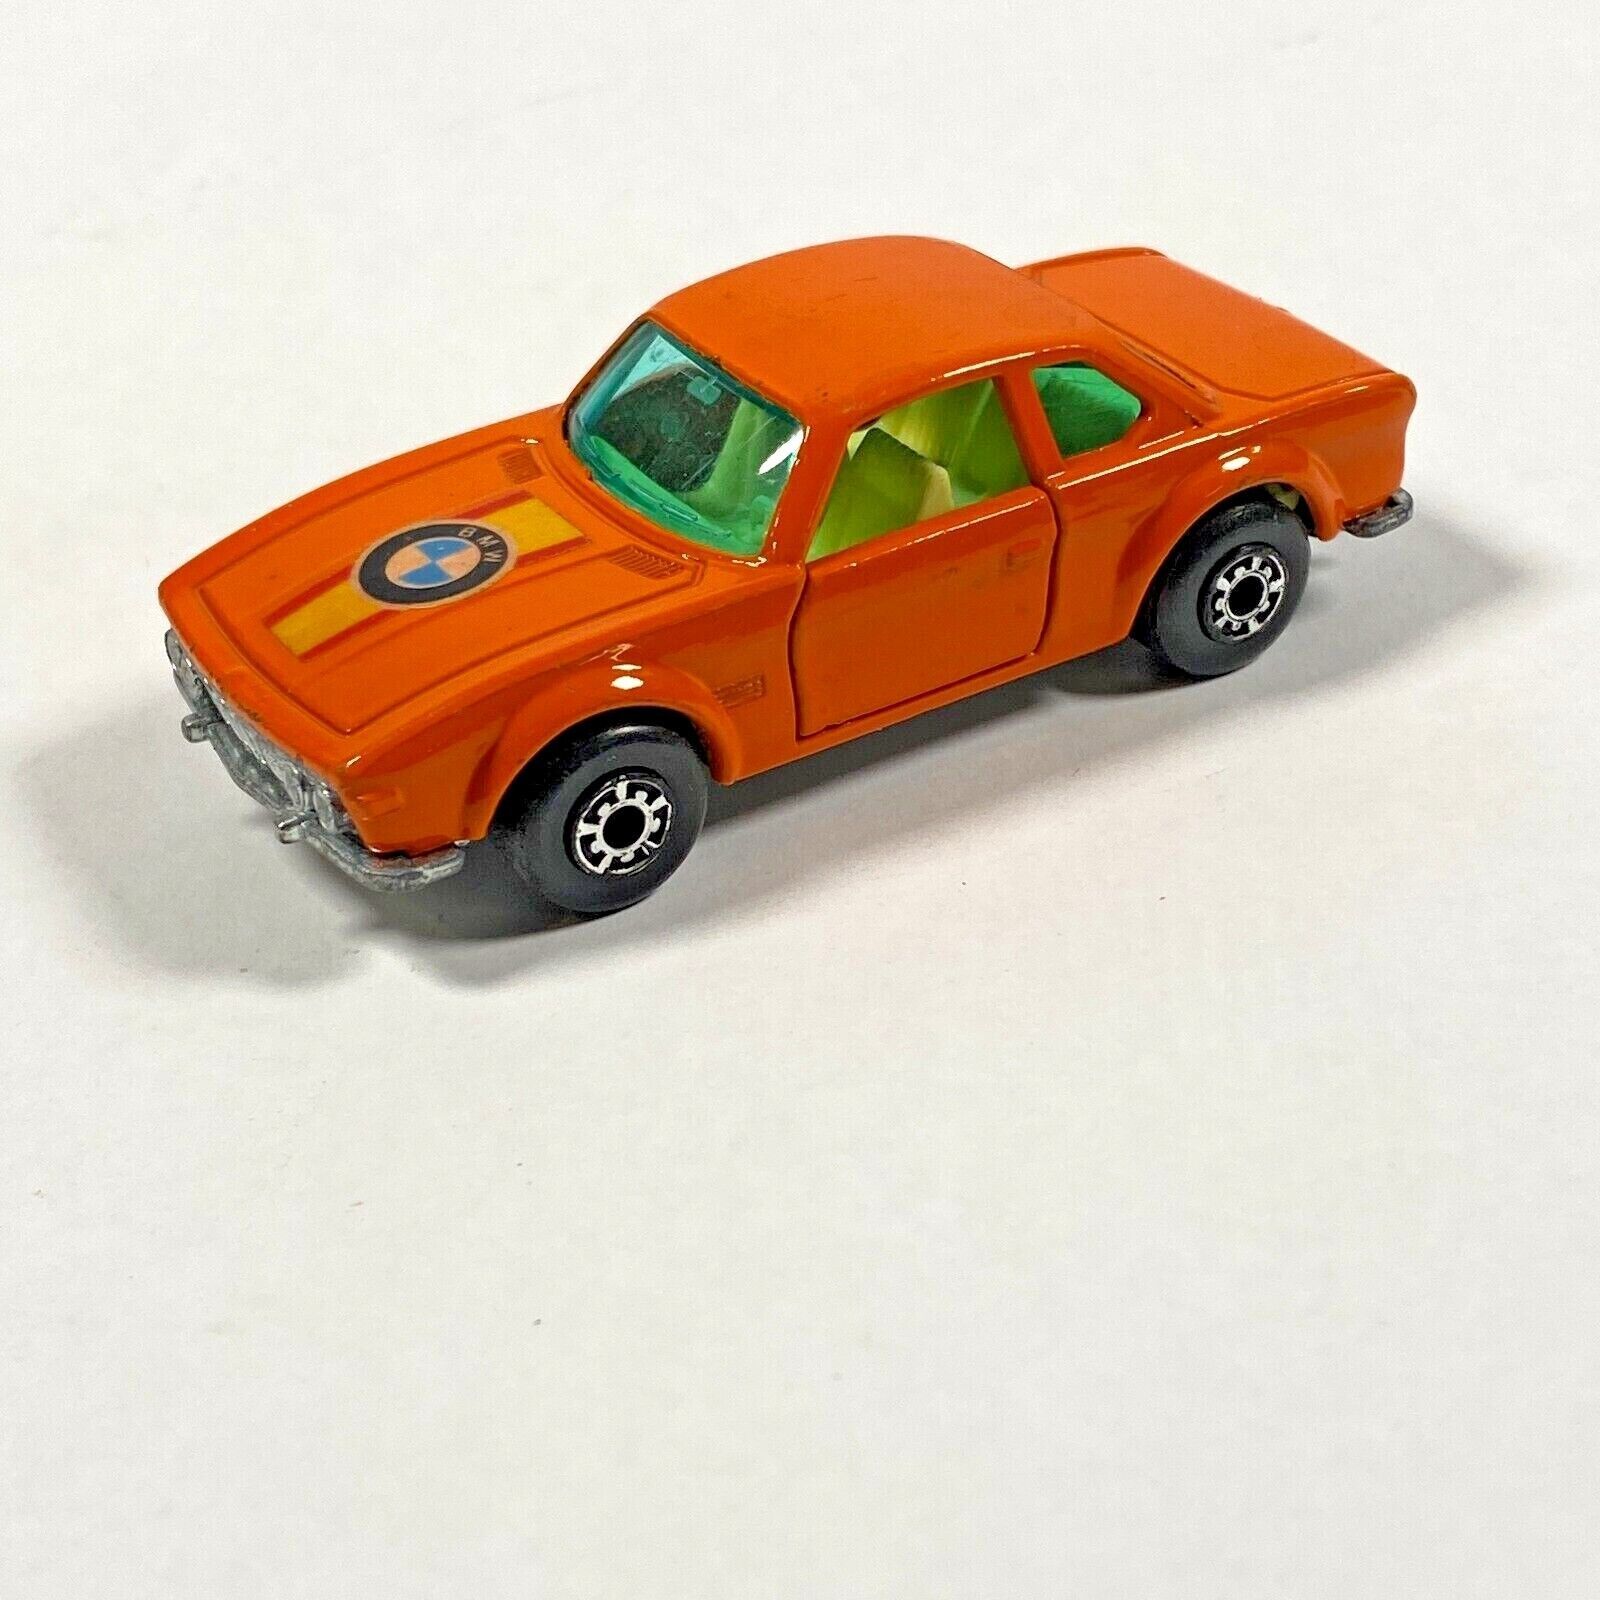 Primary image for Matchbox Superfast BMW 3 No 45 Lesney Diecast Toy Car 1976